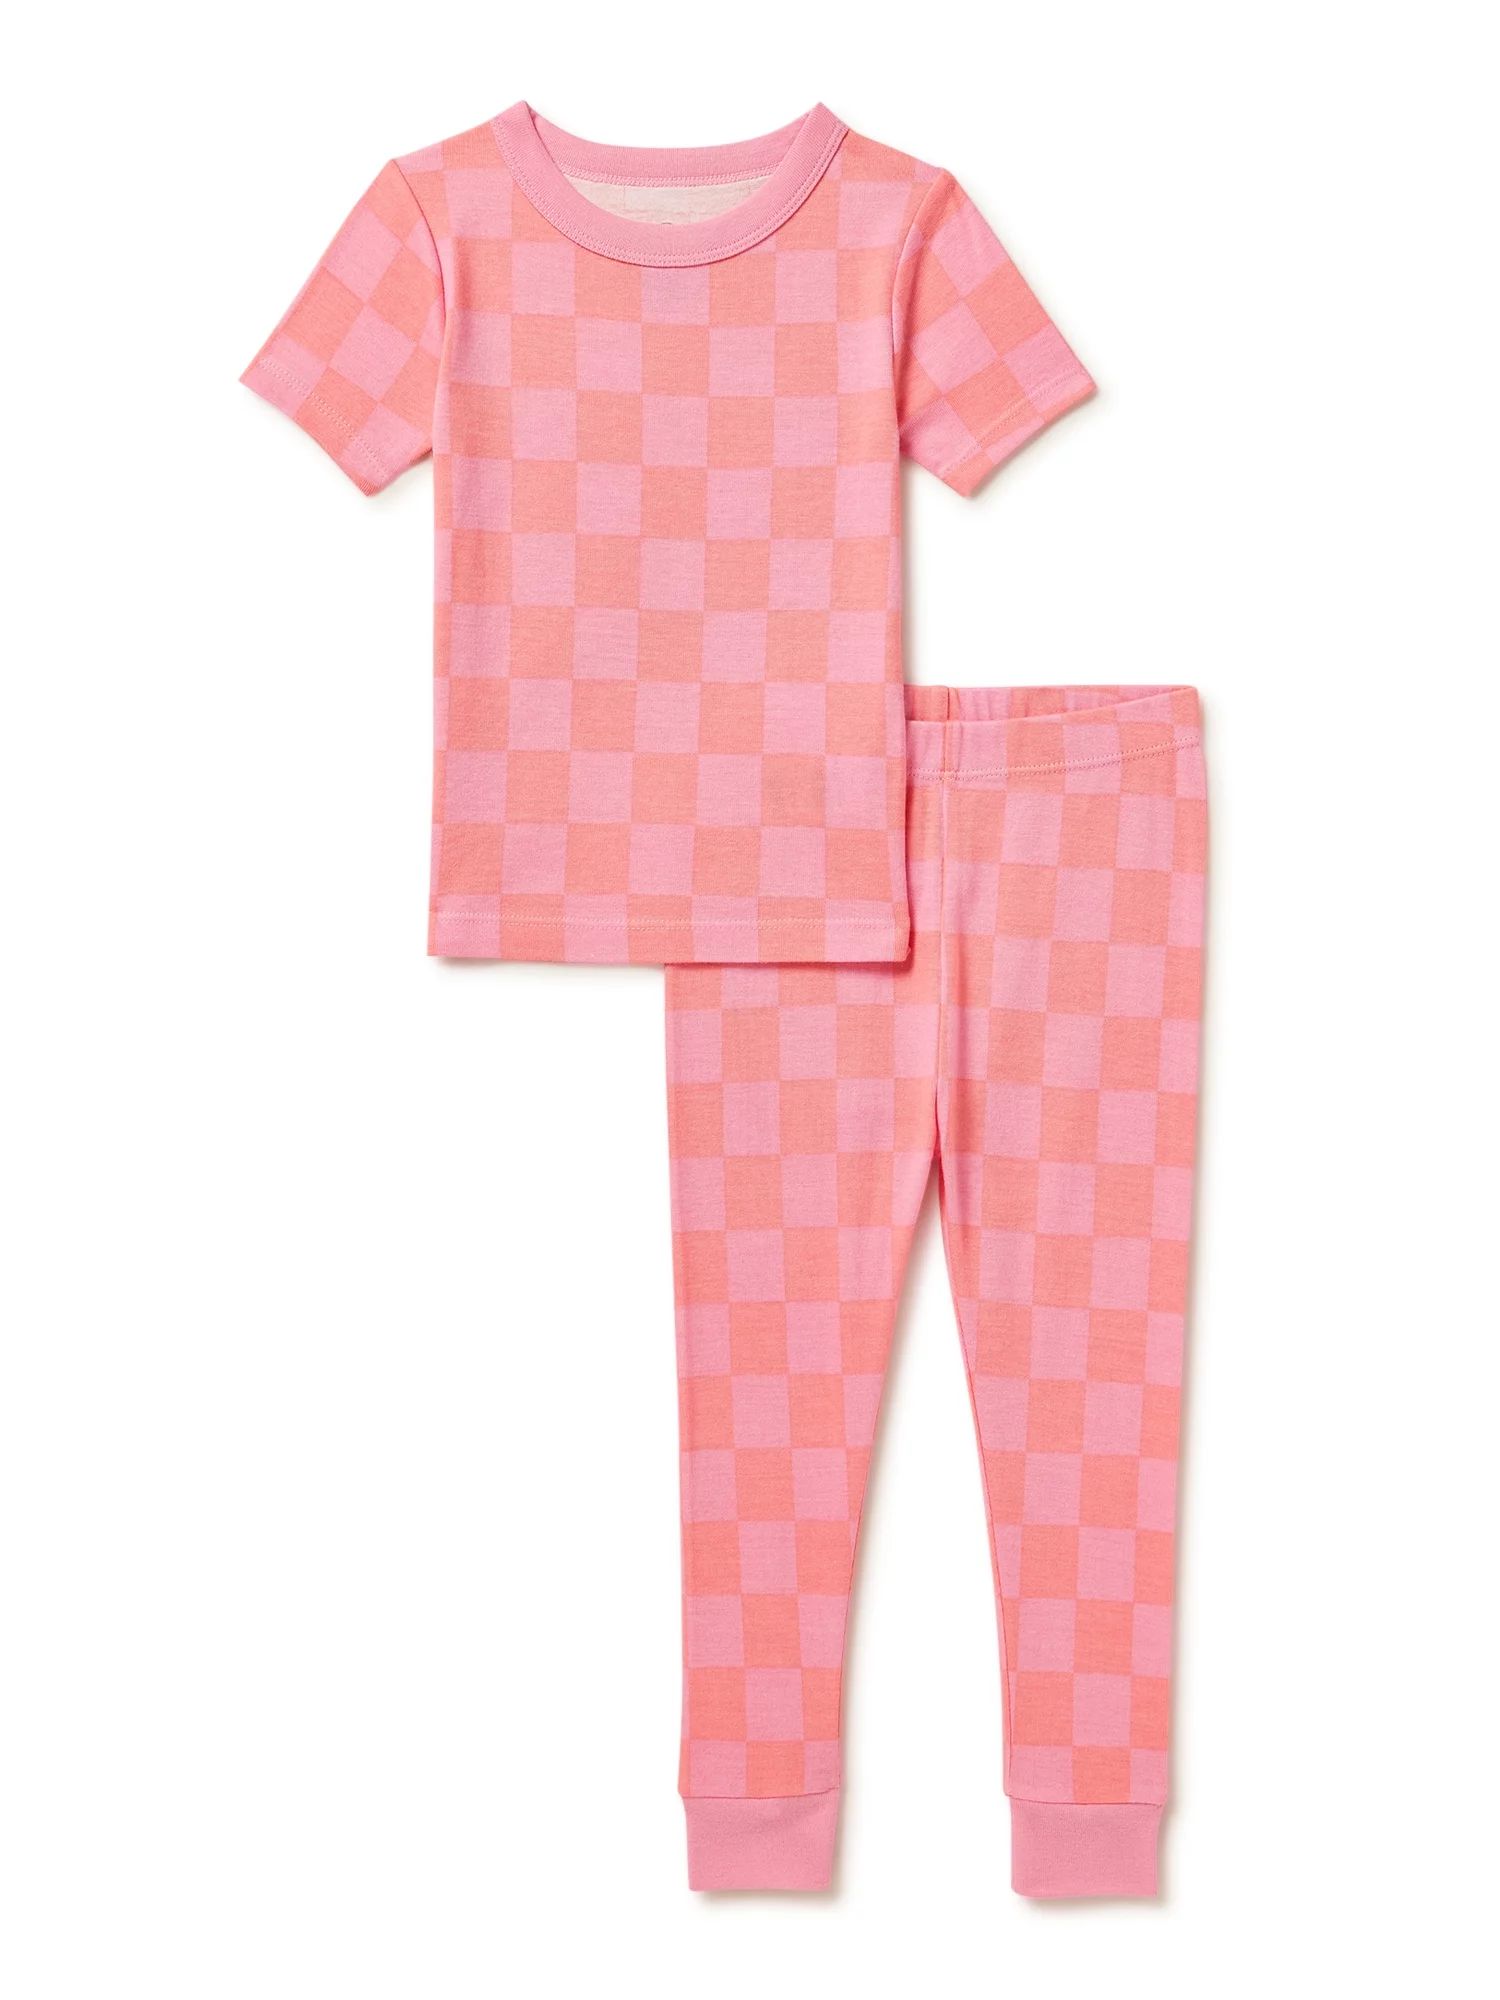 Wonder Nation Baby and Toddler Girls Cotton Tight Fit Top and Pants, 2-Piece Sleep Set, Sizes 12M... | Walmart (US)